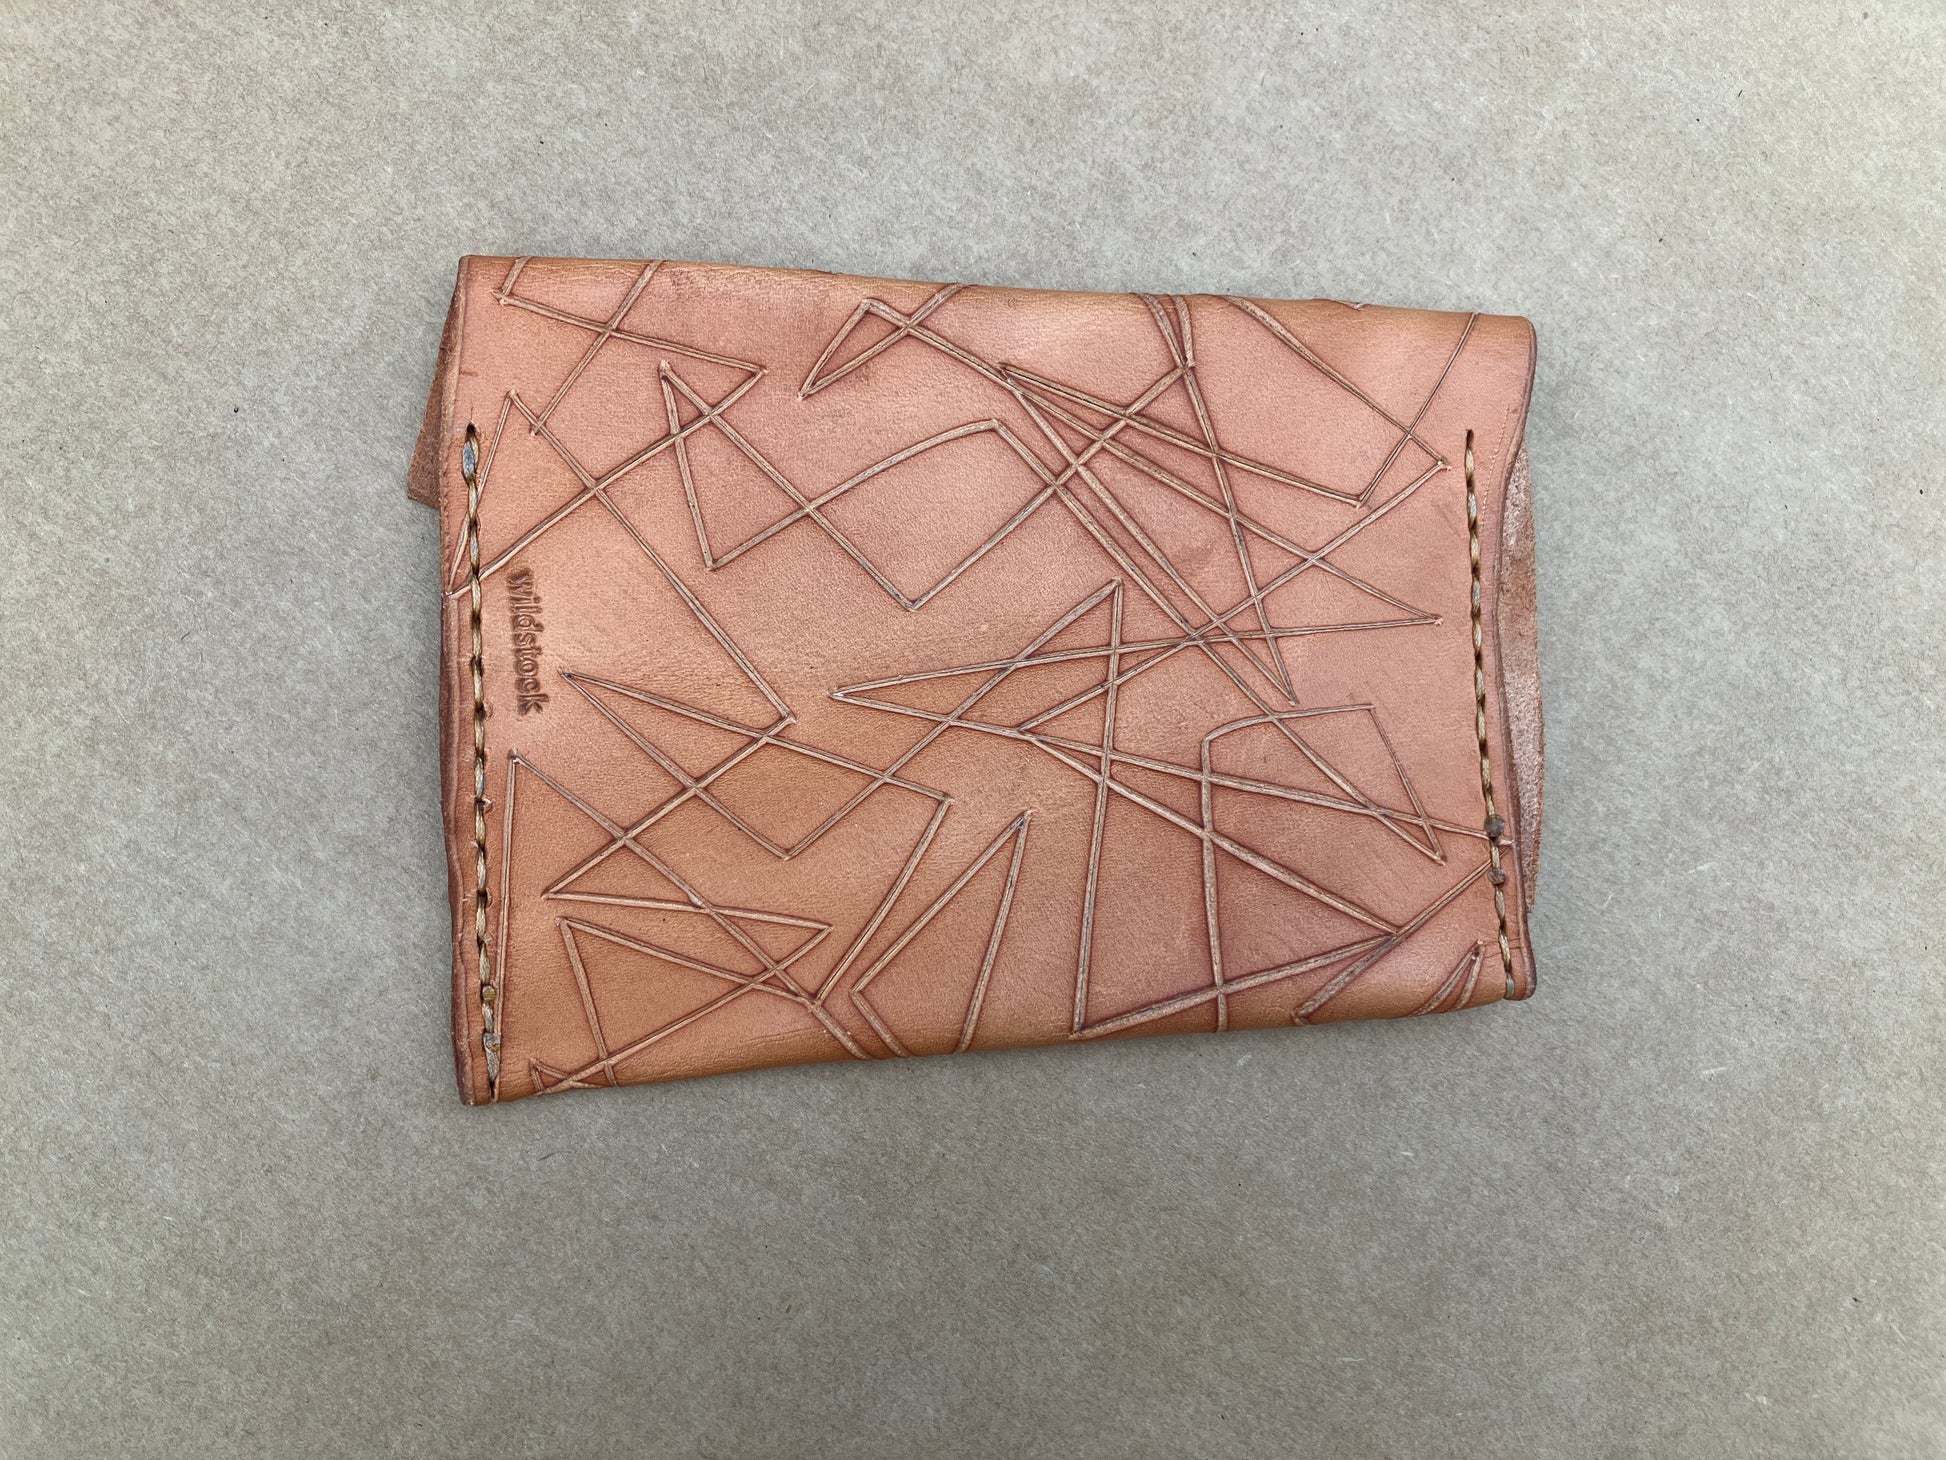 x cut pouch, embossed leather handmade by Wilder Leather